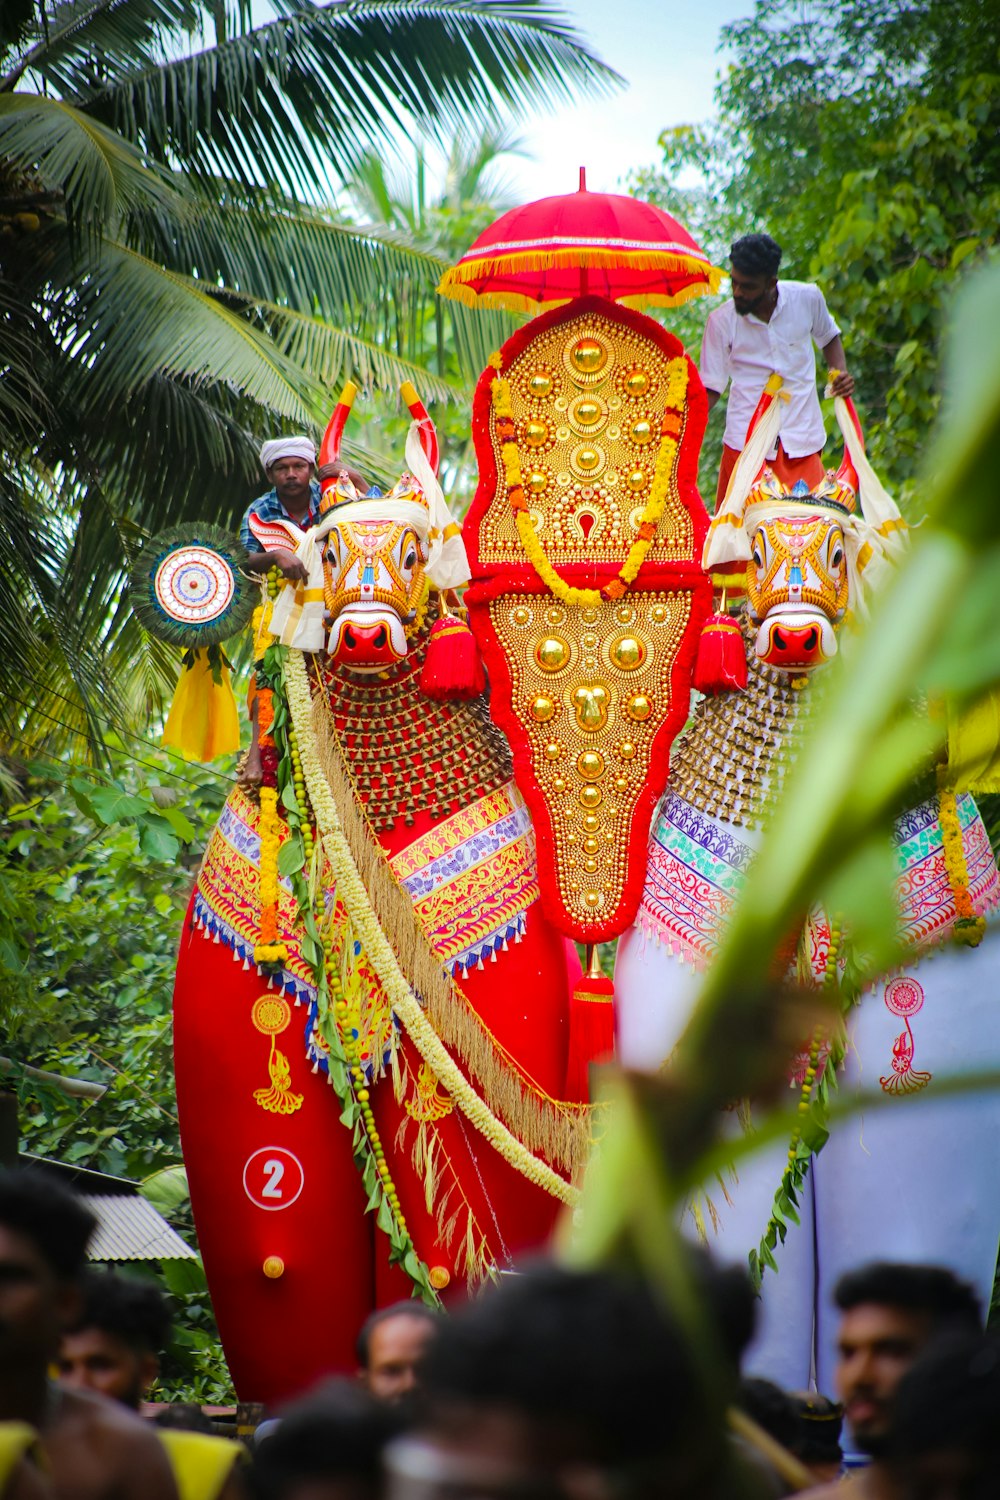 a large red and gold decorated elephant in a parade